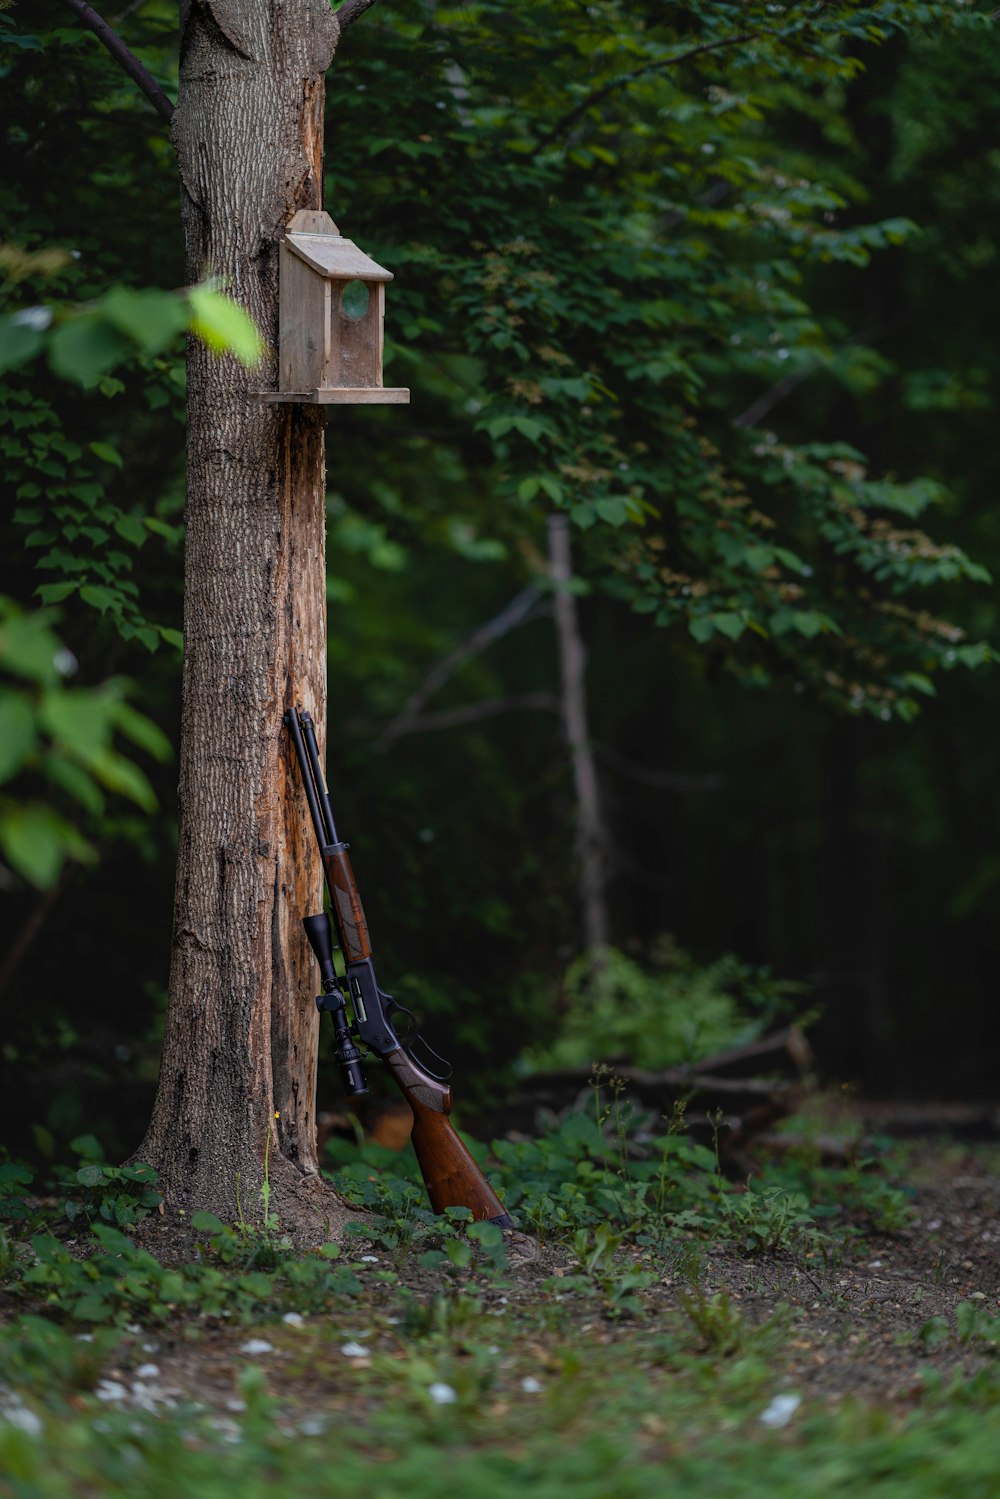 a bird house on a tree with a rifle in the foreground